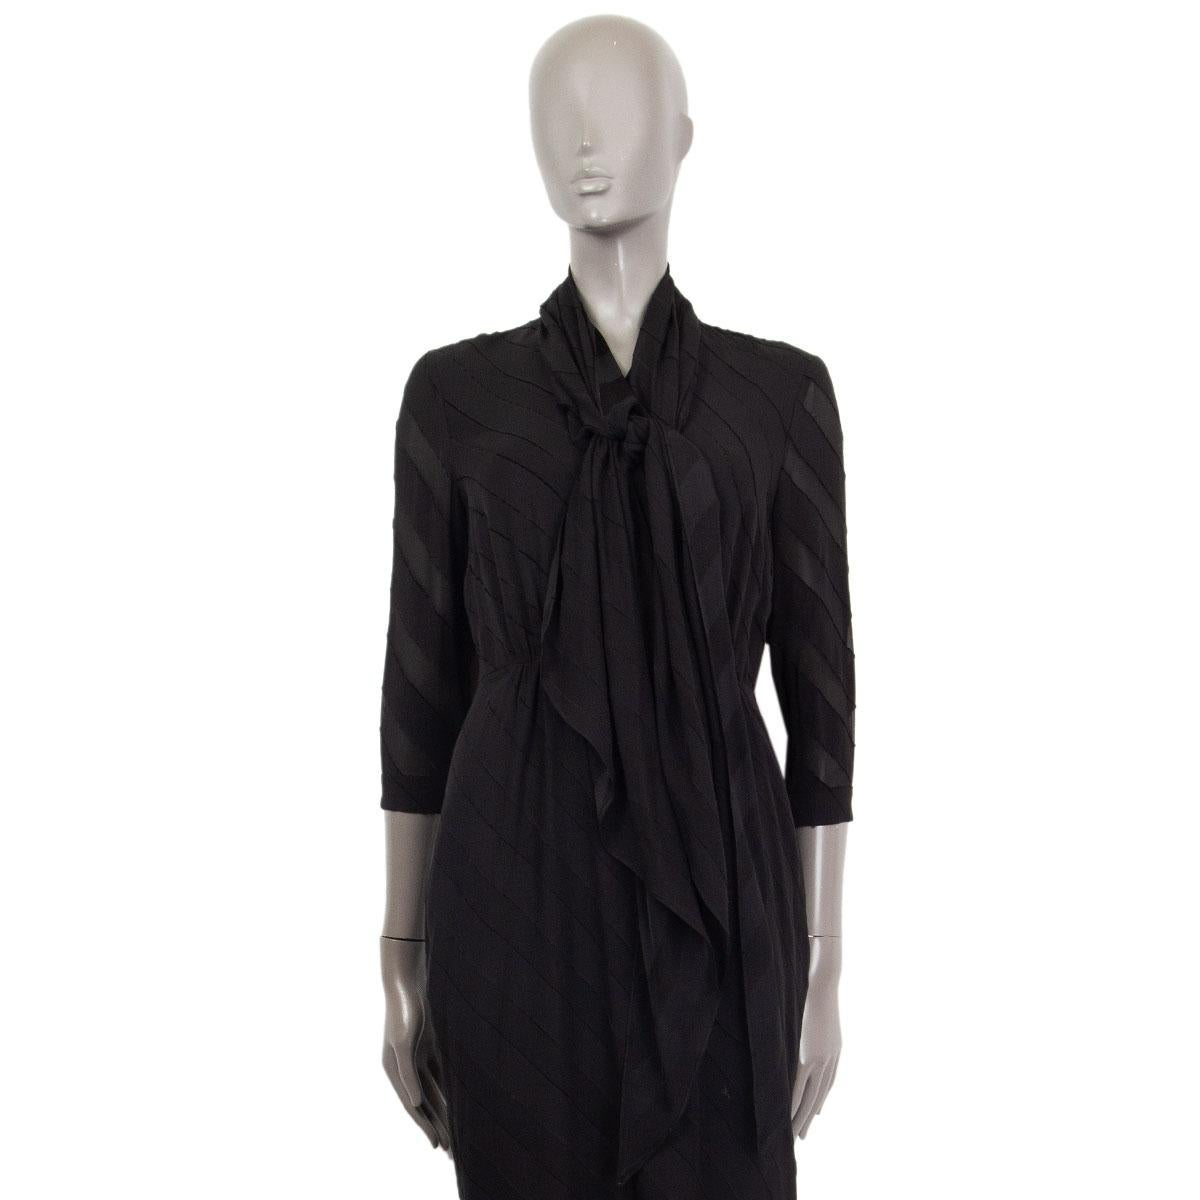 100% authentic Burberry London v-neck scarf dress in black striped silk (57%) and viscose (43%). Lined in black silk (93%) and elastane (7%). Opens with a zipper on the side. Brand new. 

Measurements
Tag Size	6
Size	XS
Shoulder Width	42cm